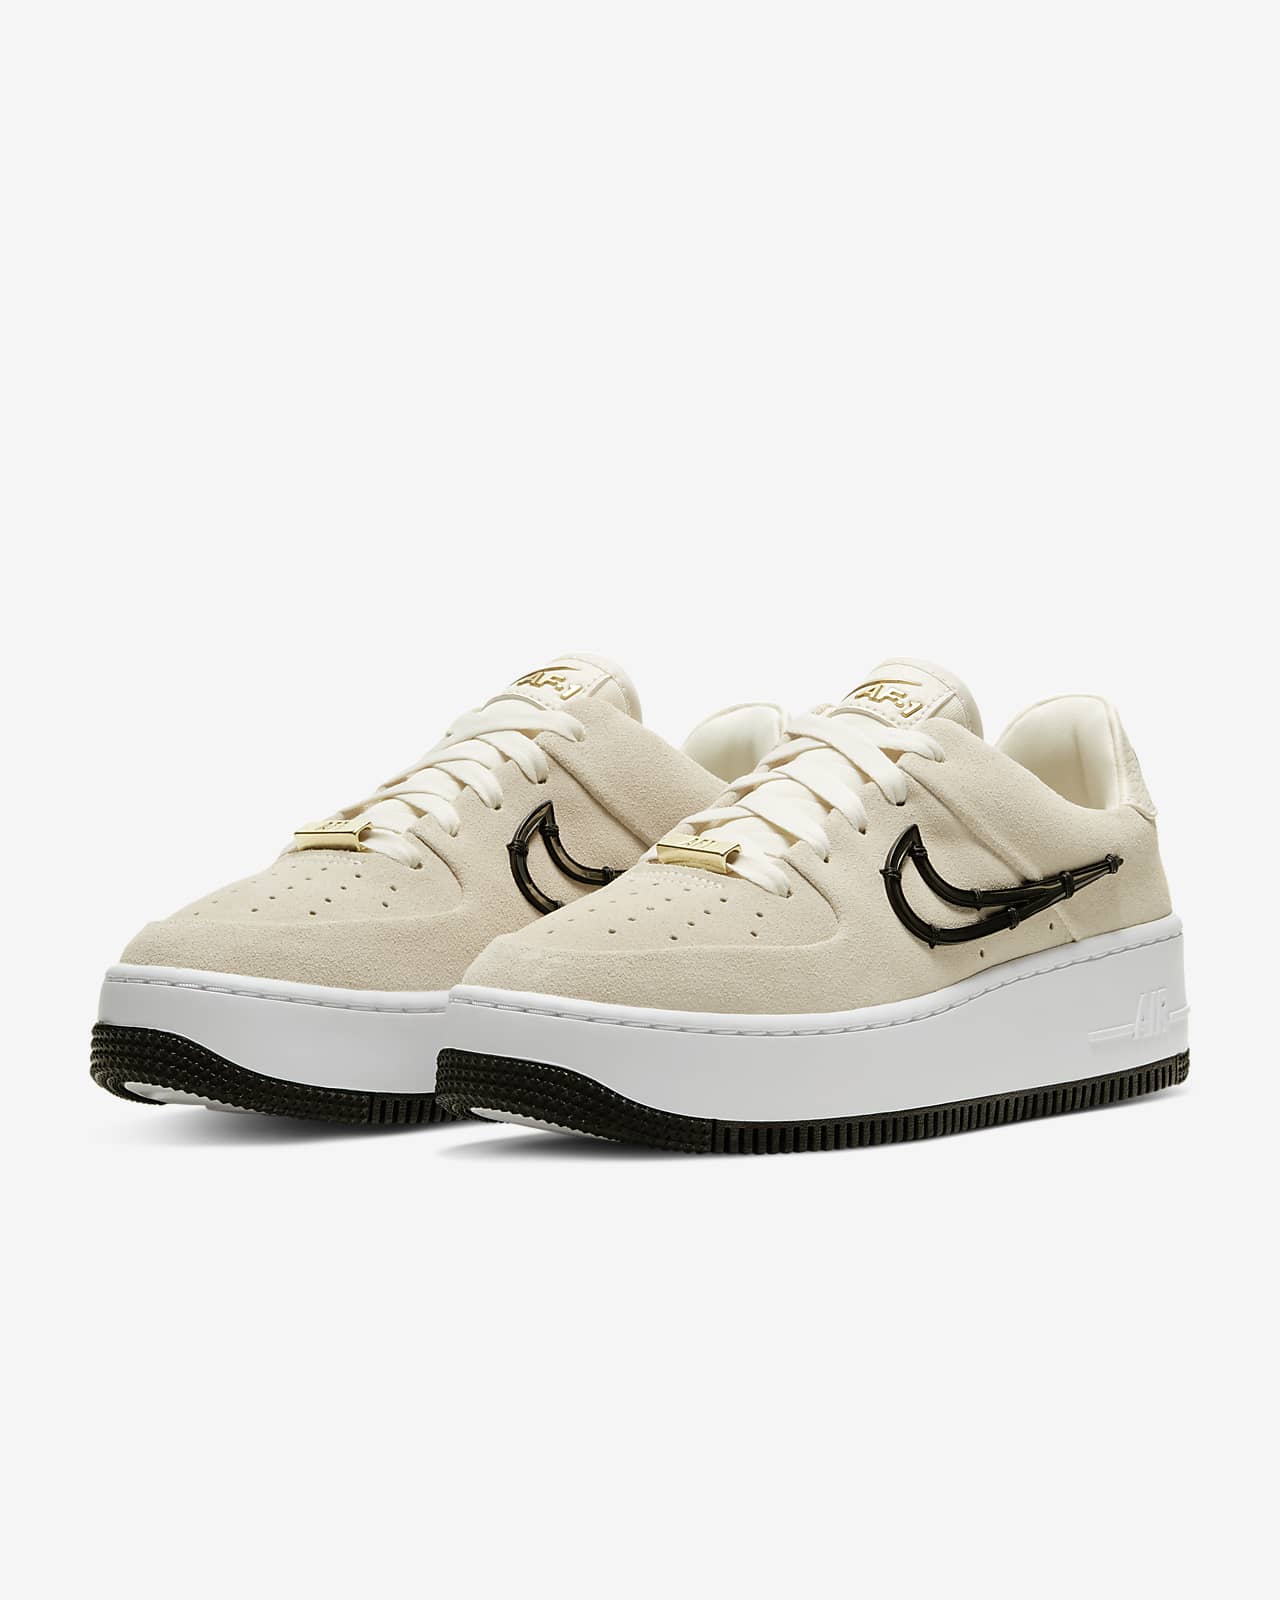 nike air force 1 sage low women's shoes